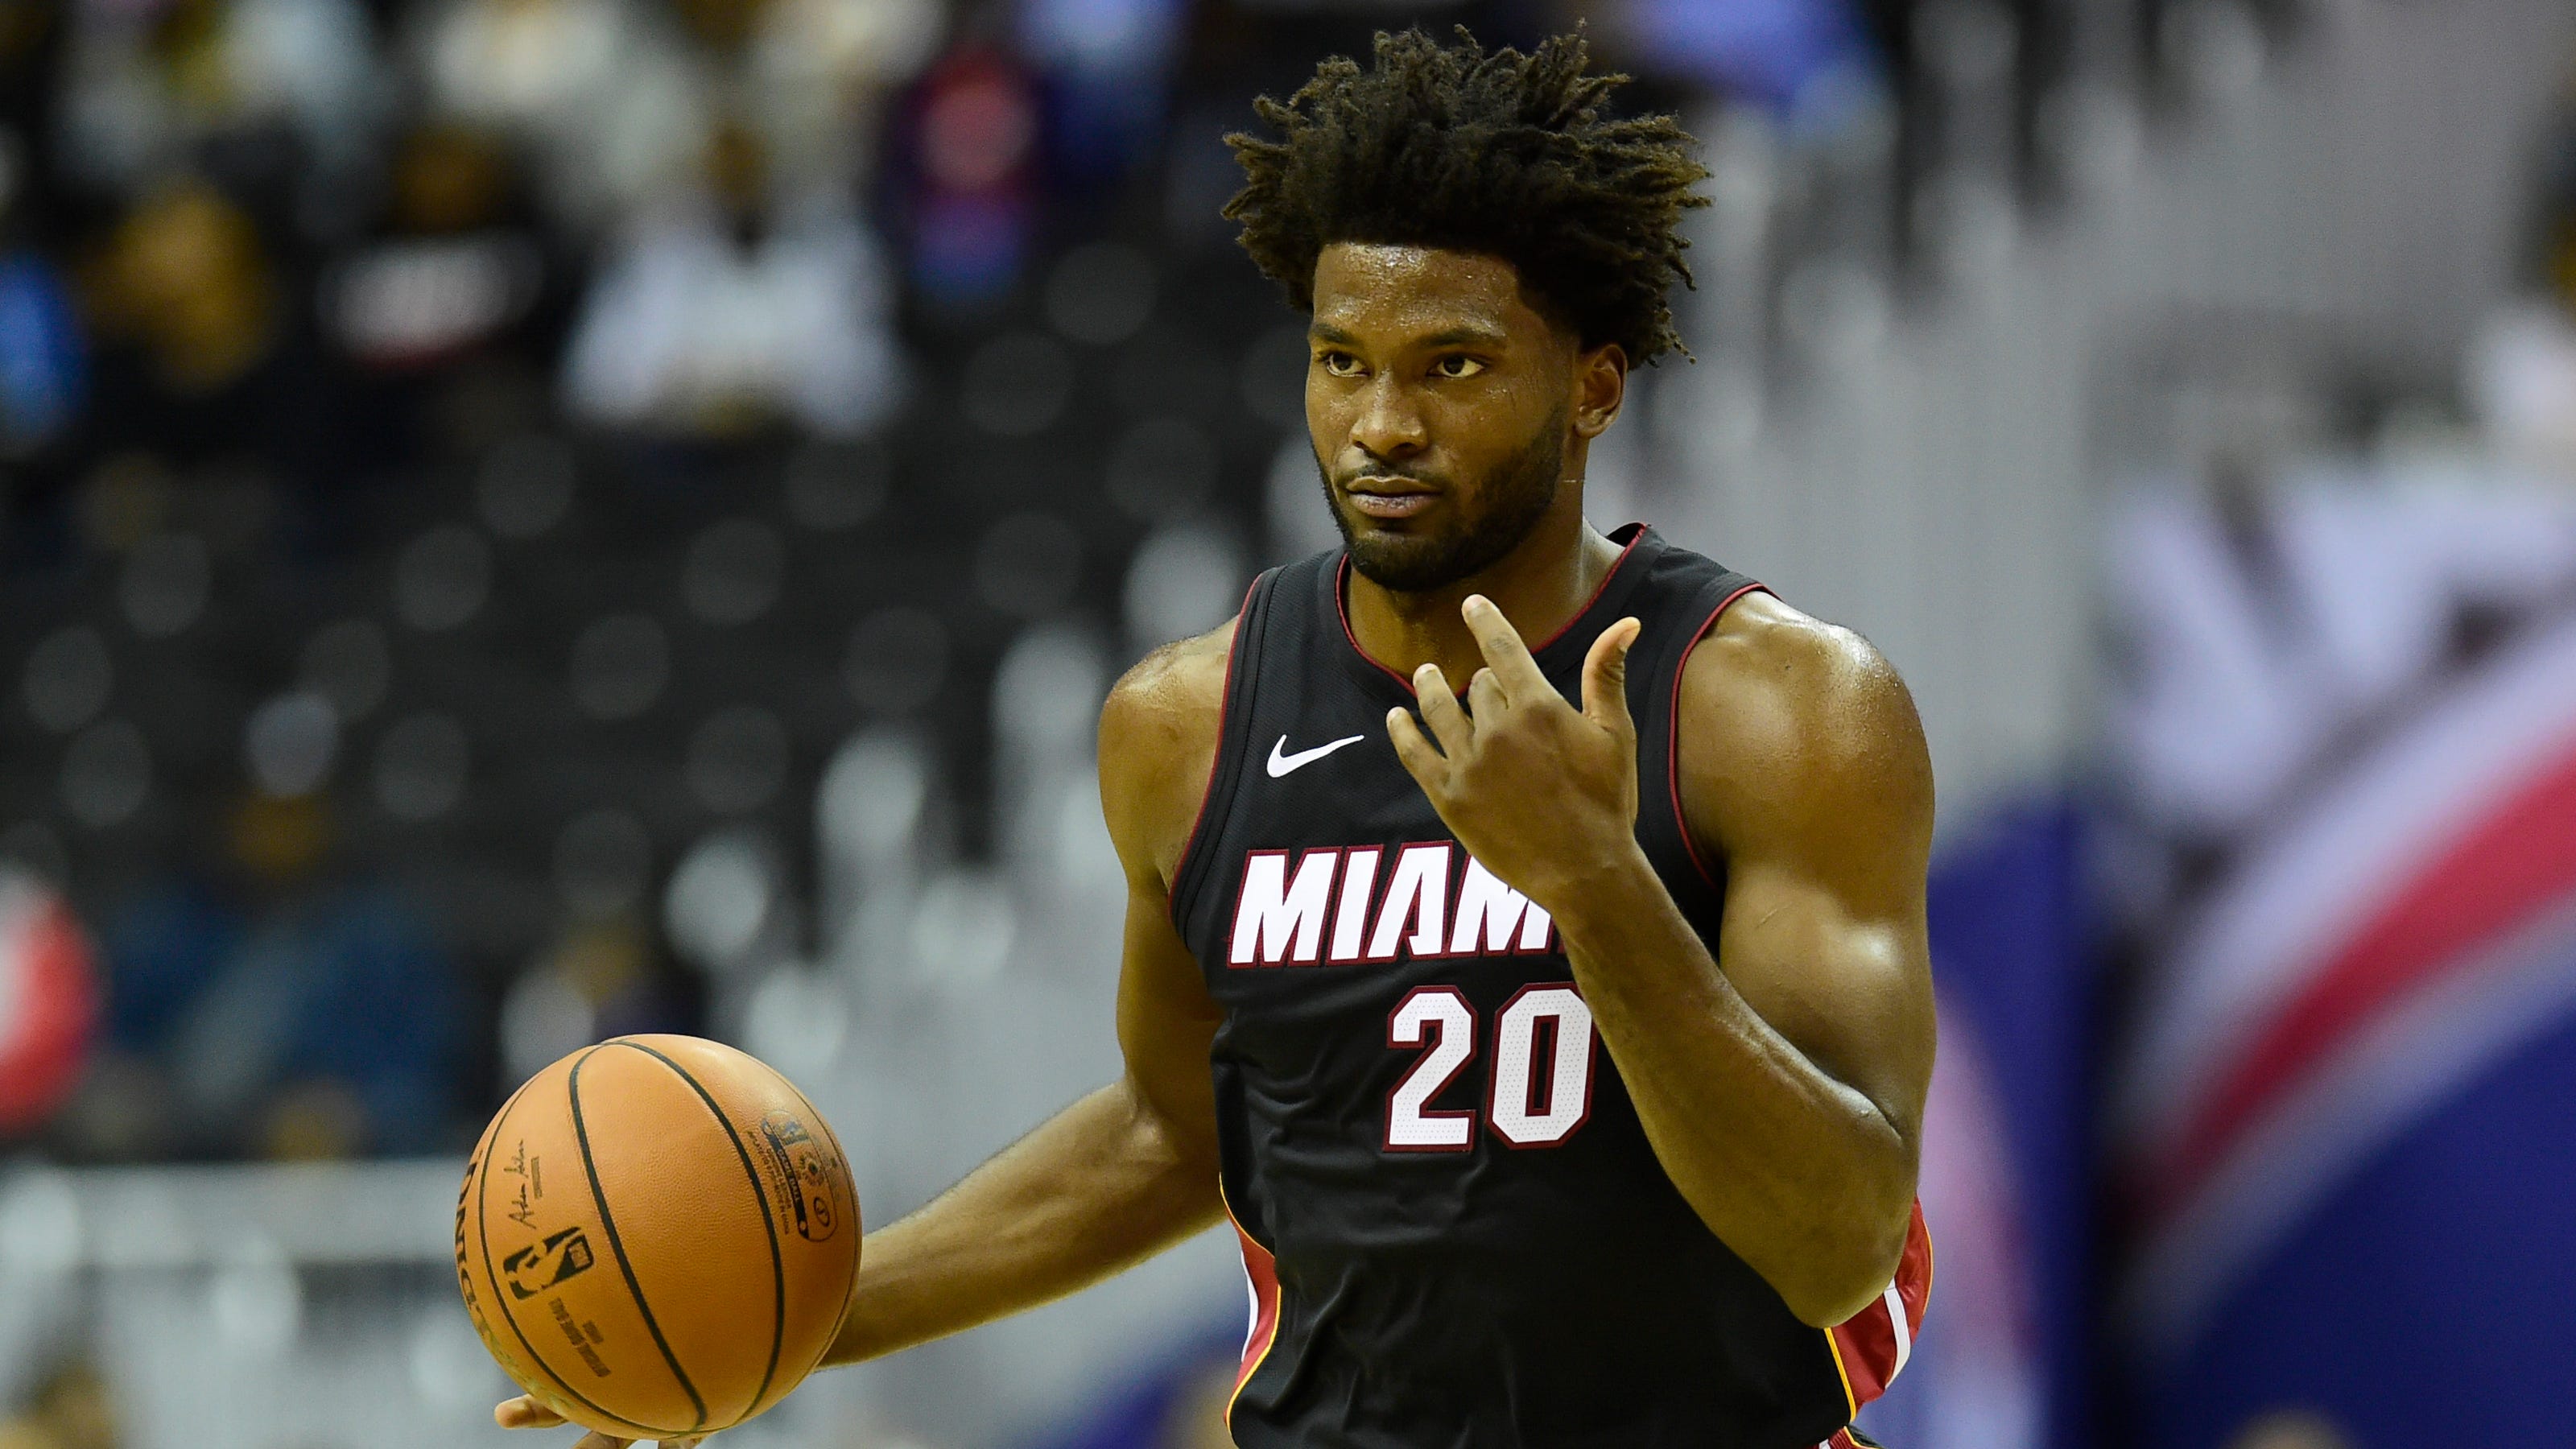 Justise Winslow's name had been floated in trade rumors